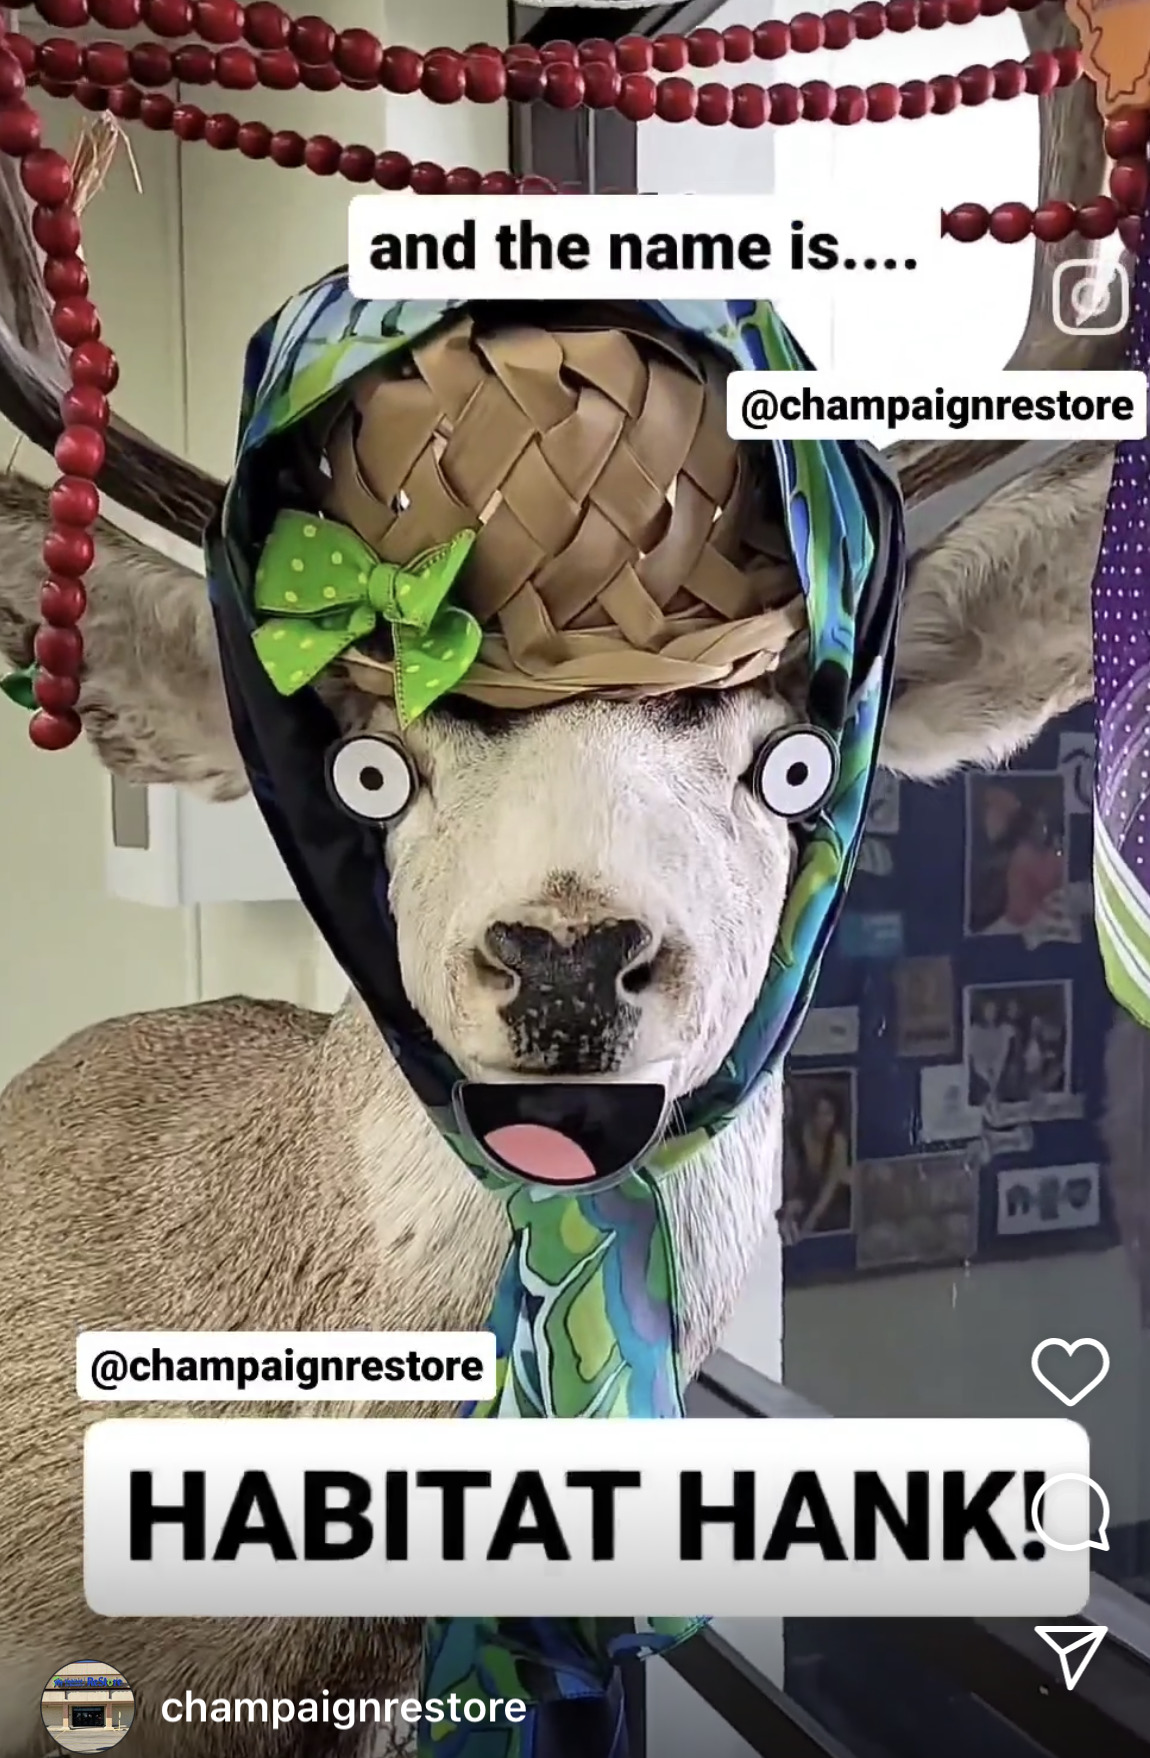 Screenshot of an Instagram Reel from @ChampaignRestore. The image shows a mounted deer head decorated with fake cutout eyes, a fake cutout smile, a basket and bow on the head to look like a hat, and other decorative paraphernalia hanging from the antlers. Text reads "and the name is... Habitat Hank"